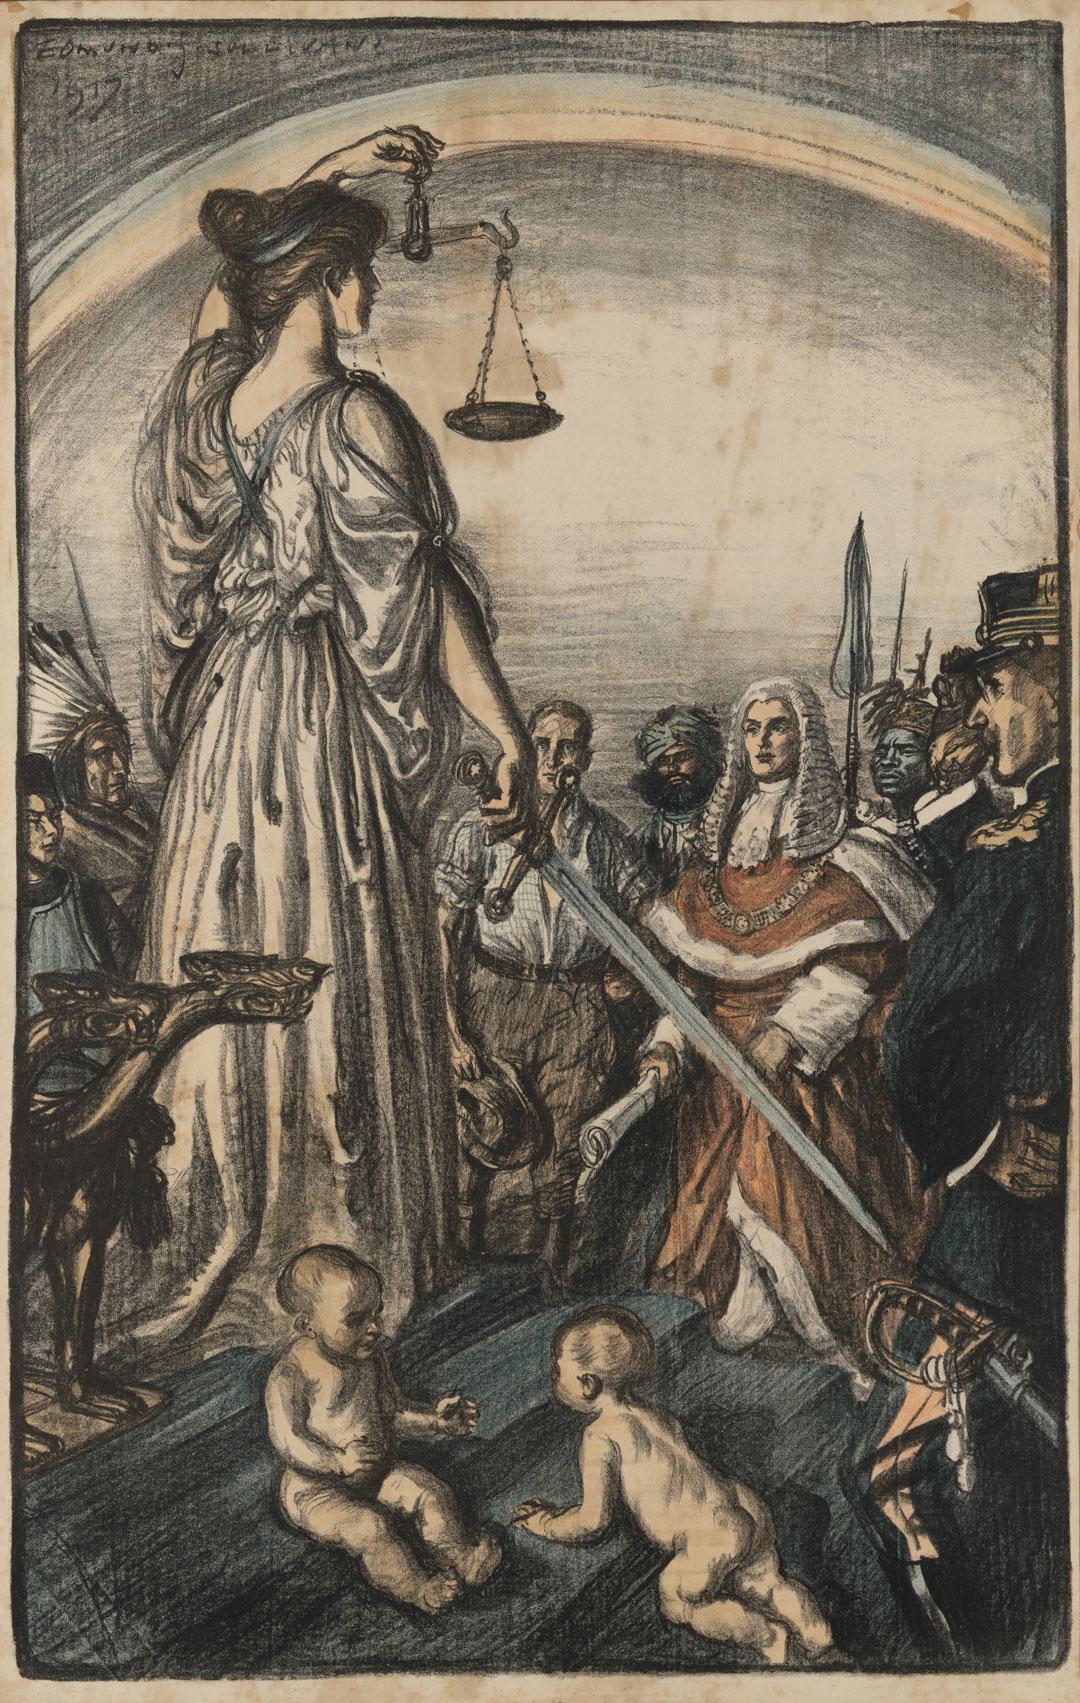 Artwork The reign of justice (from 'The ideals', the second part of 'The Great War: Britain's efforts and ideals shown in a series of lithographic prints' series) this artwork made of Colour lithograph on paper, created in 1917-01-01